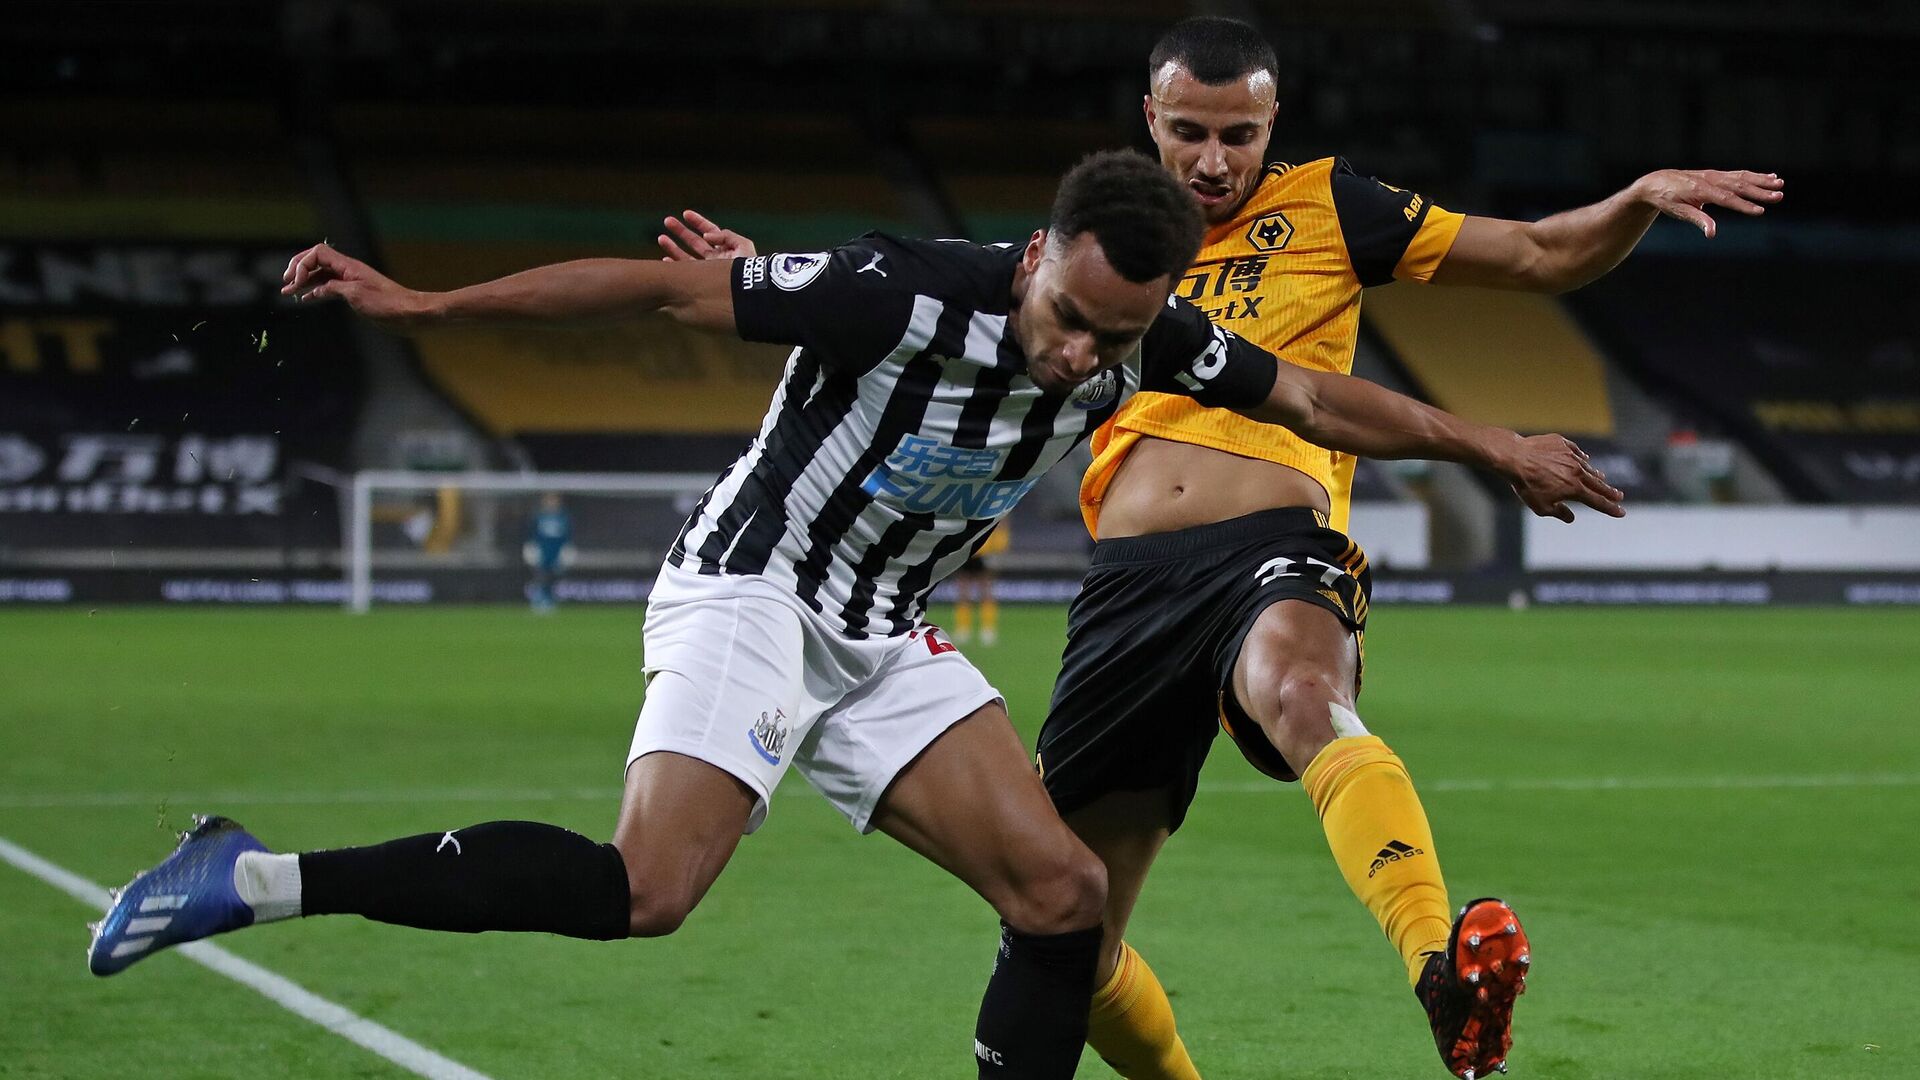 Wolverhampton Wanderers' Moroccan midfielder Romain Saiss (R) vies with Newcastle United's English midfielder Jacob Murphy during the English Premier League football match between Wolverhampton Wanderers and Newcastle United at the Molineux stadium in Wolverhampton, central England on October 25, 2020. (Photo by Nick Potts / POOL / AFP) / RESTRICTED TO EDITORIAL USE. No use with unauthorized audio, video, data, fixture lists, club/league logos or 'live' services. Online in-match use limited to 120 images. An additional 40 images may be used in extra time. No video emulation. Social media in-match use limited to 120 images. An additional 40 images may be used in extra time. No use in betting publications, games or single club/league/player publications. /  - РИА Новости, 1920, 25.10.2020